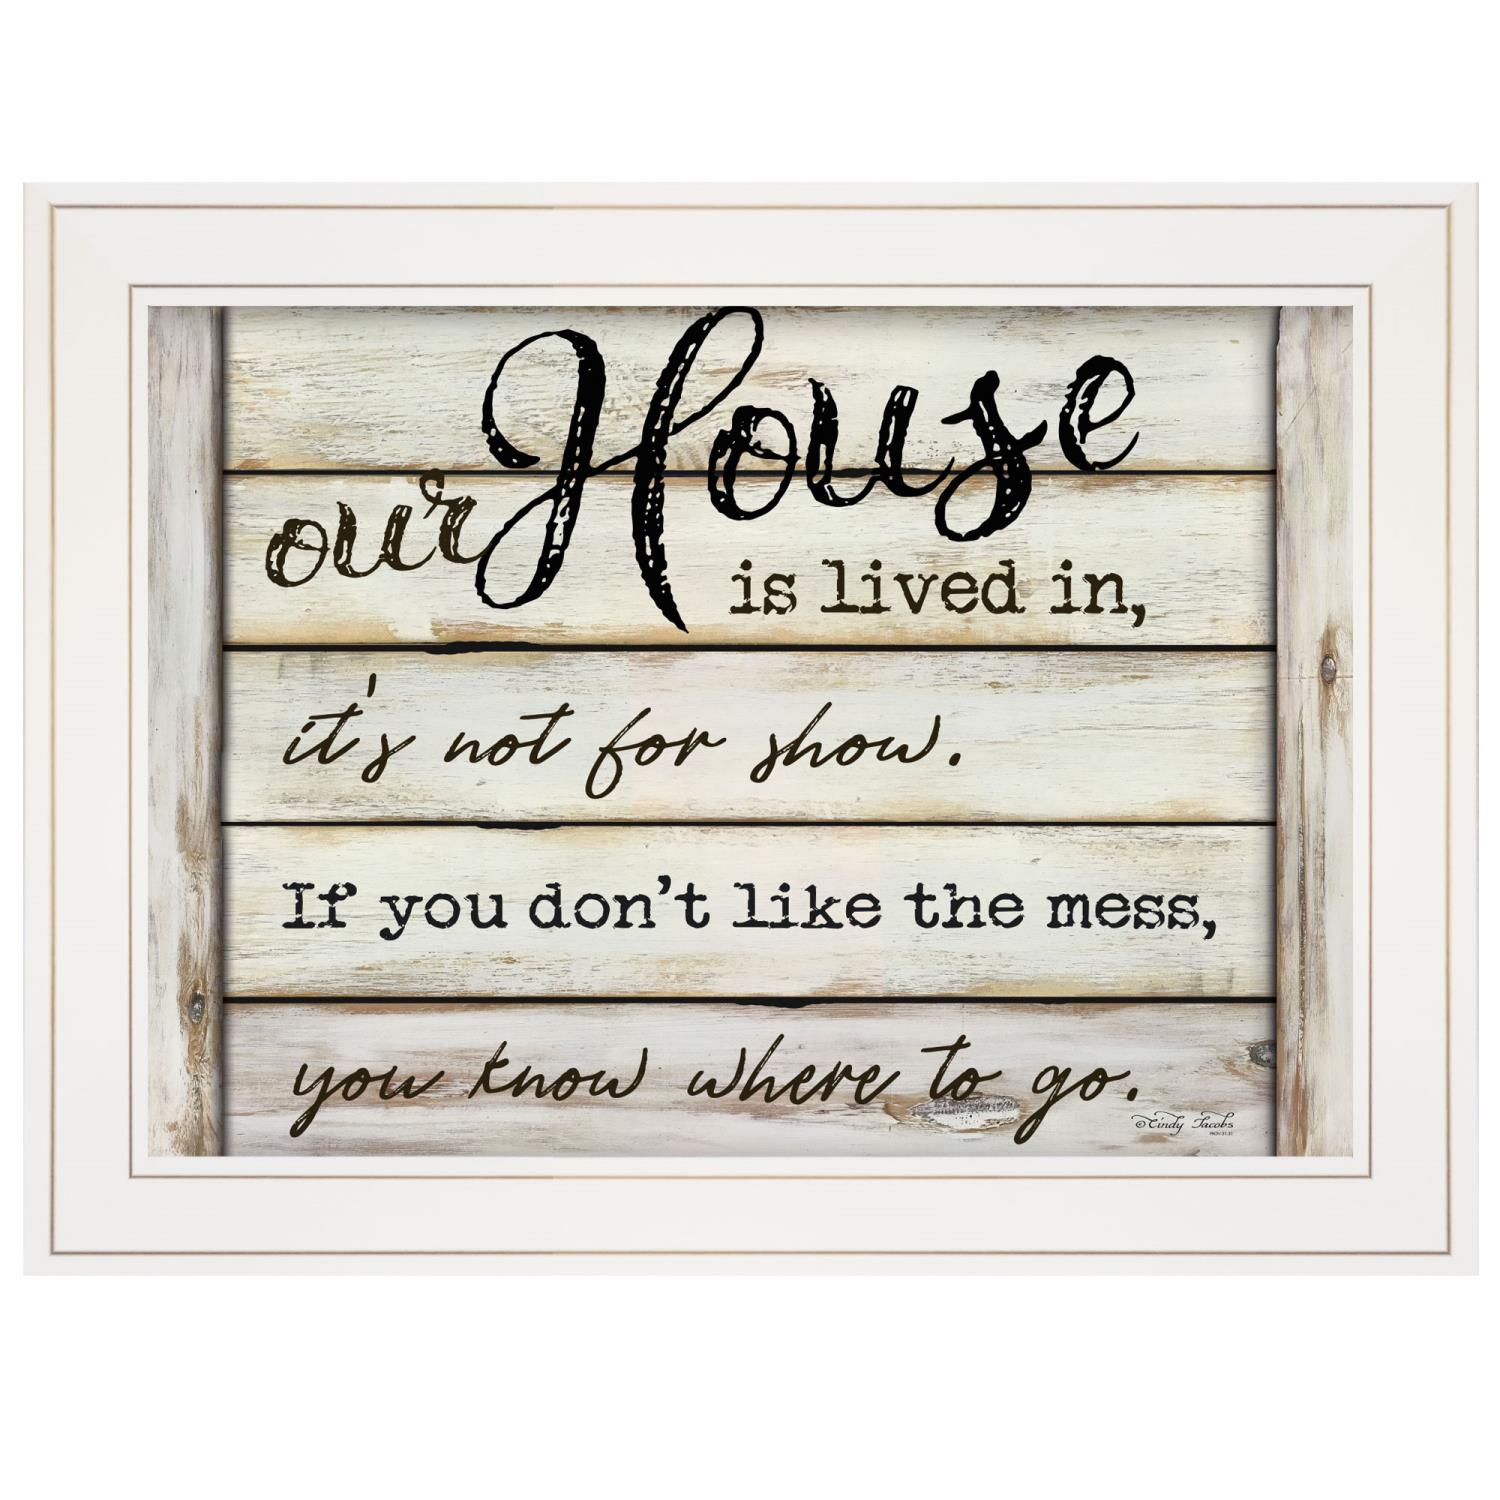 TrendyDecor4U "Our House is Lived In" by Cindy Jacobs, Ready to Hang Framed Print, White Frame